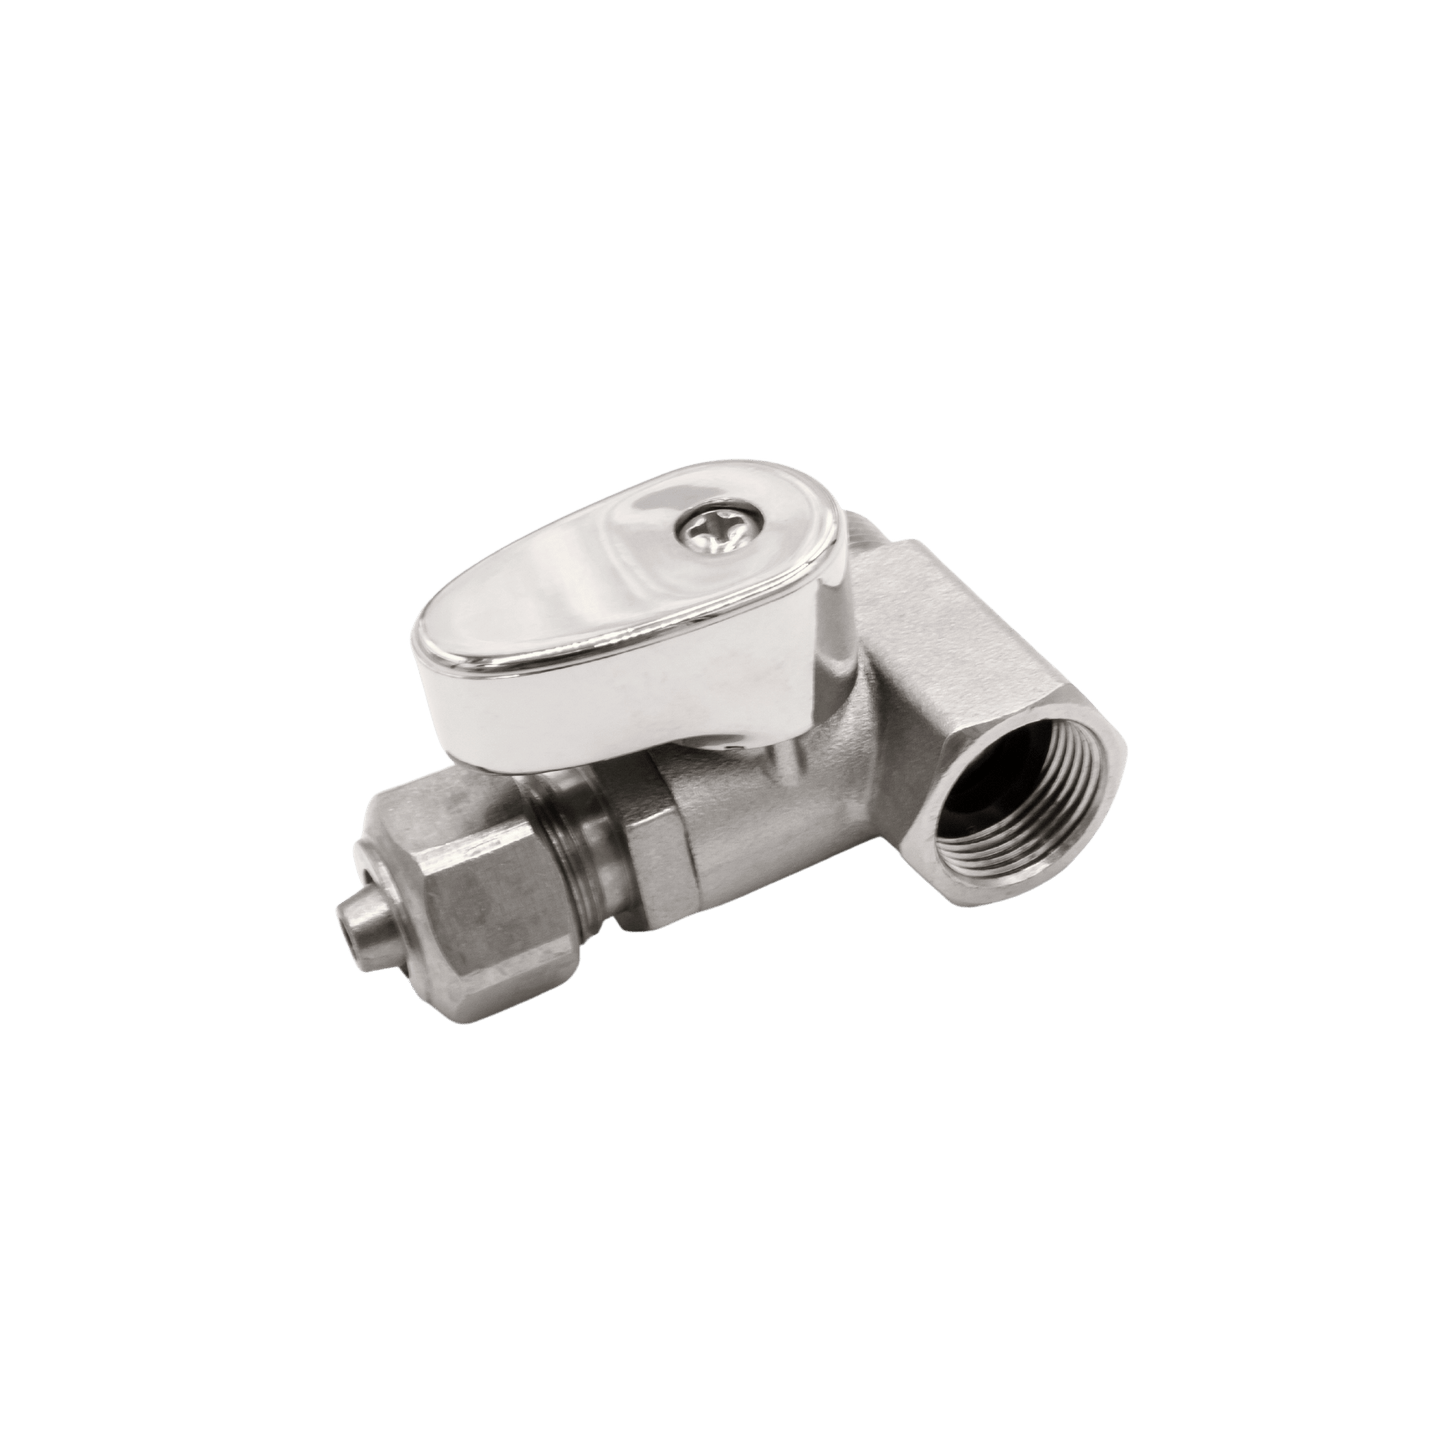 Hot Water, Teardrop shaped, Nickel, Shut-Off T-Adapter with ball-valve